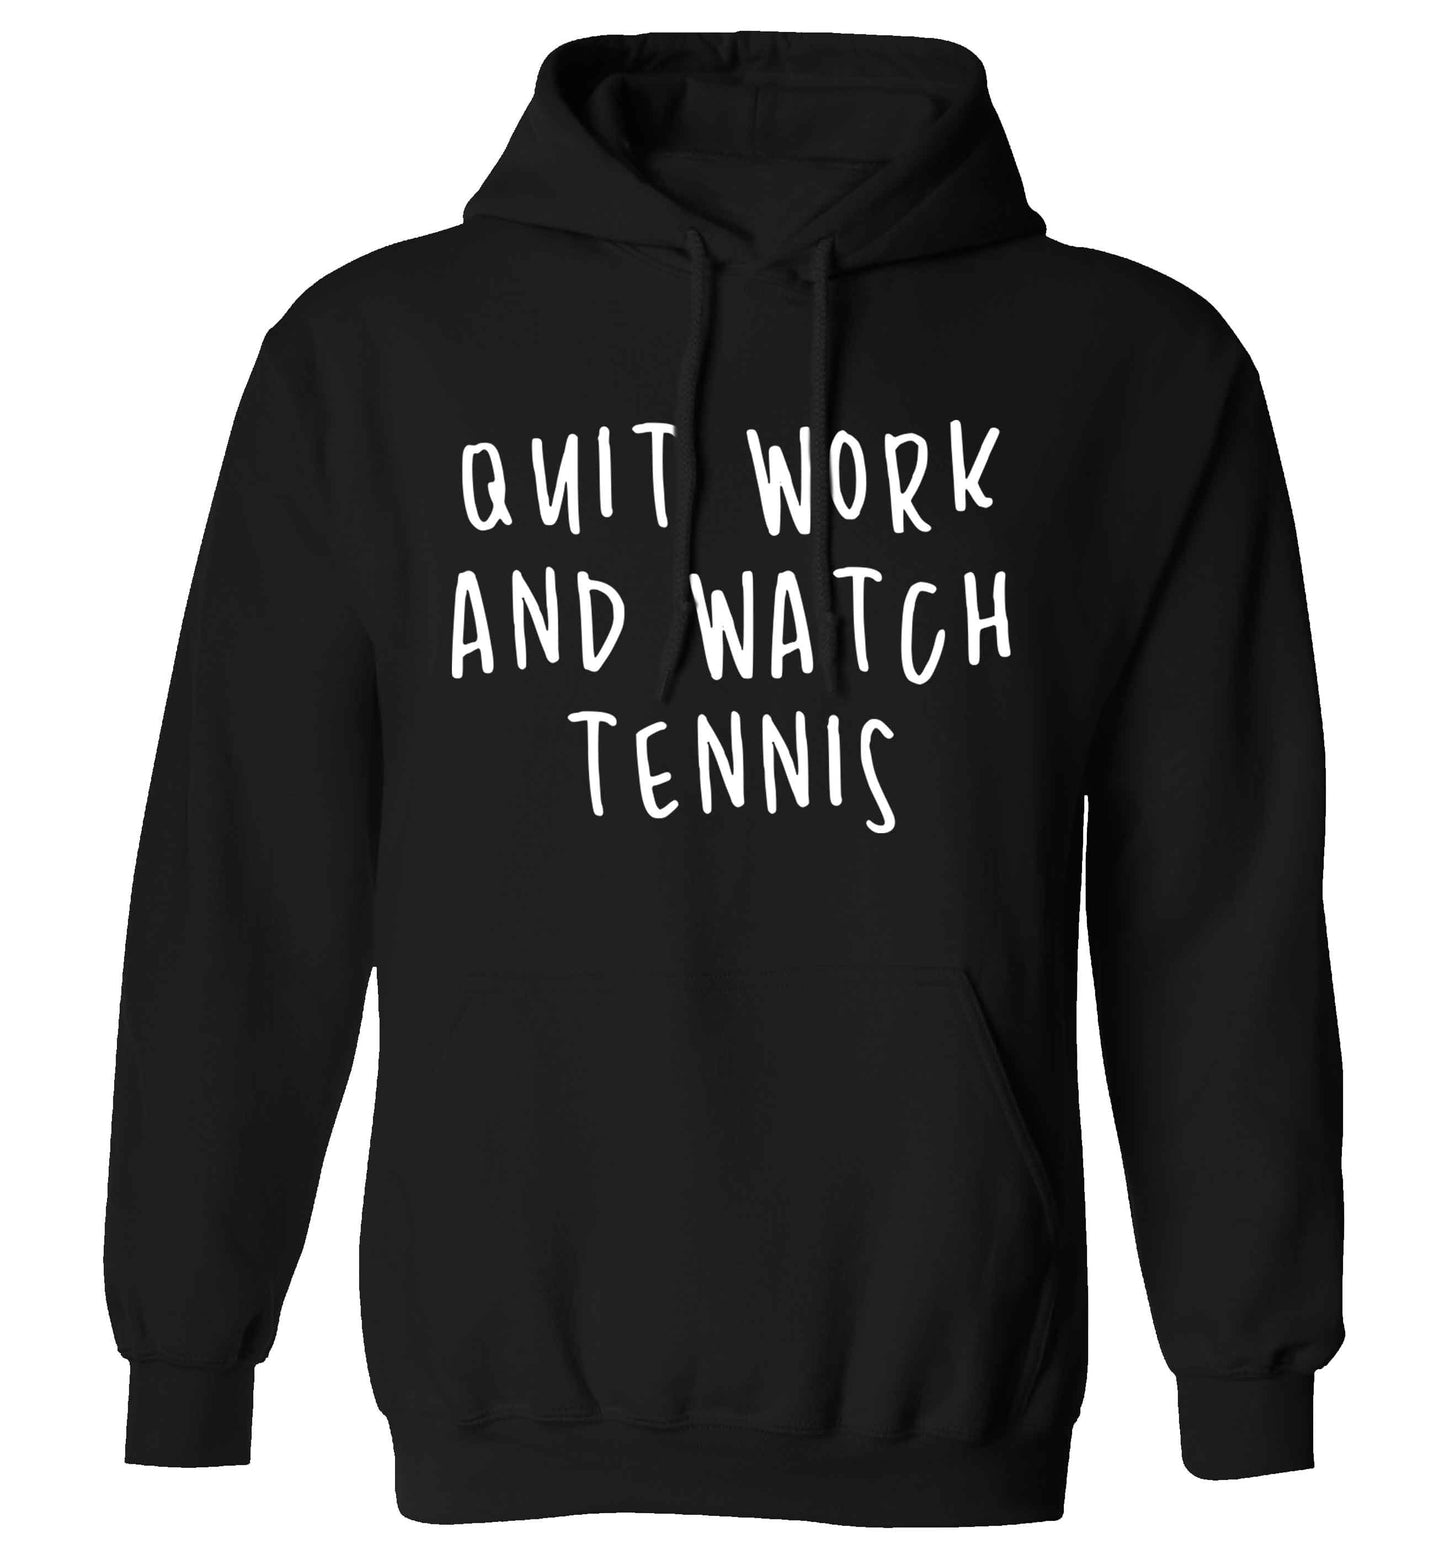 Quit work and watch tennis adults unisex black hoodie 2XL